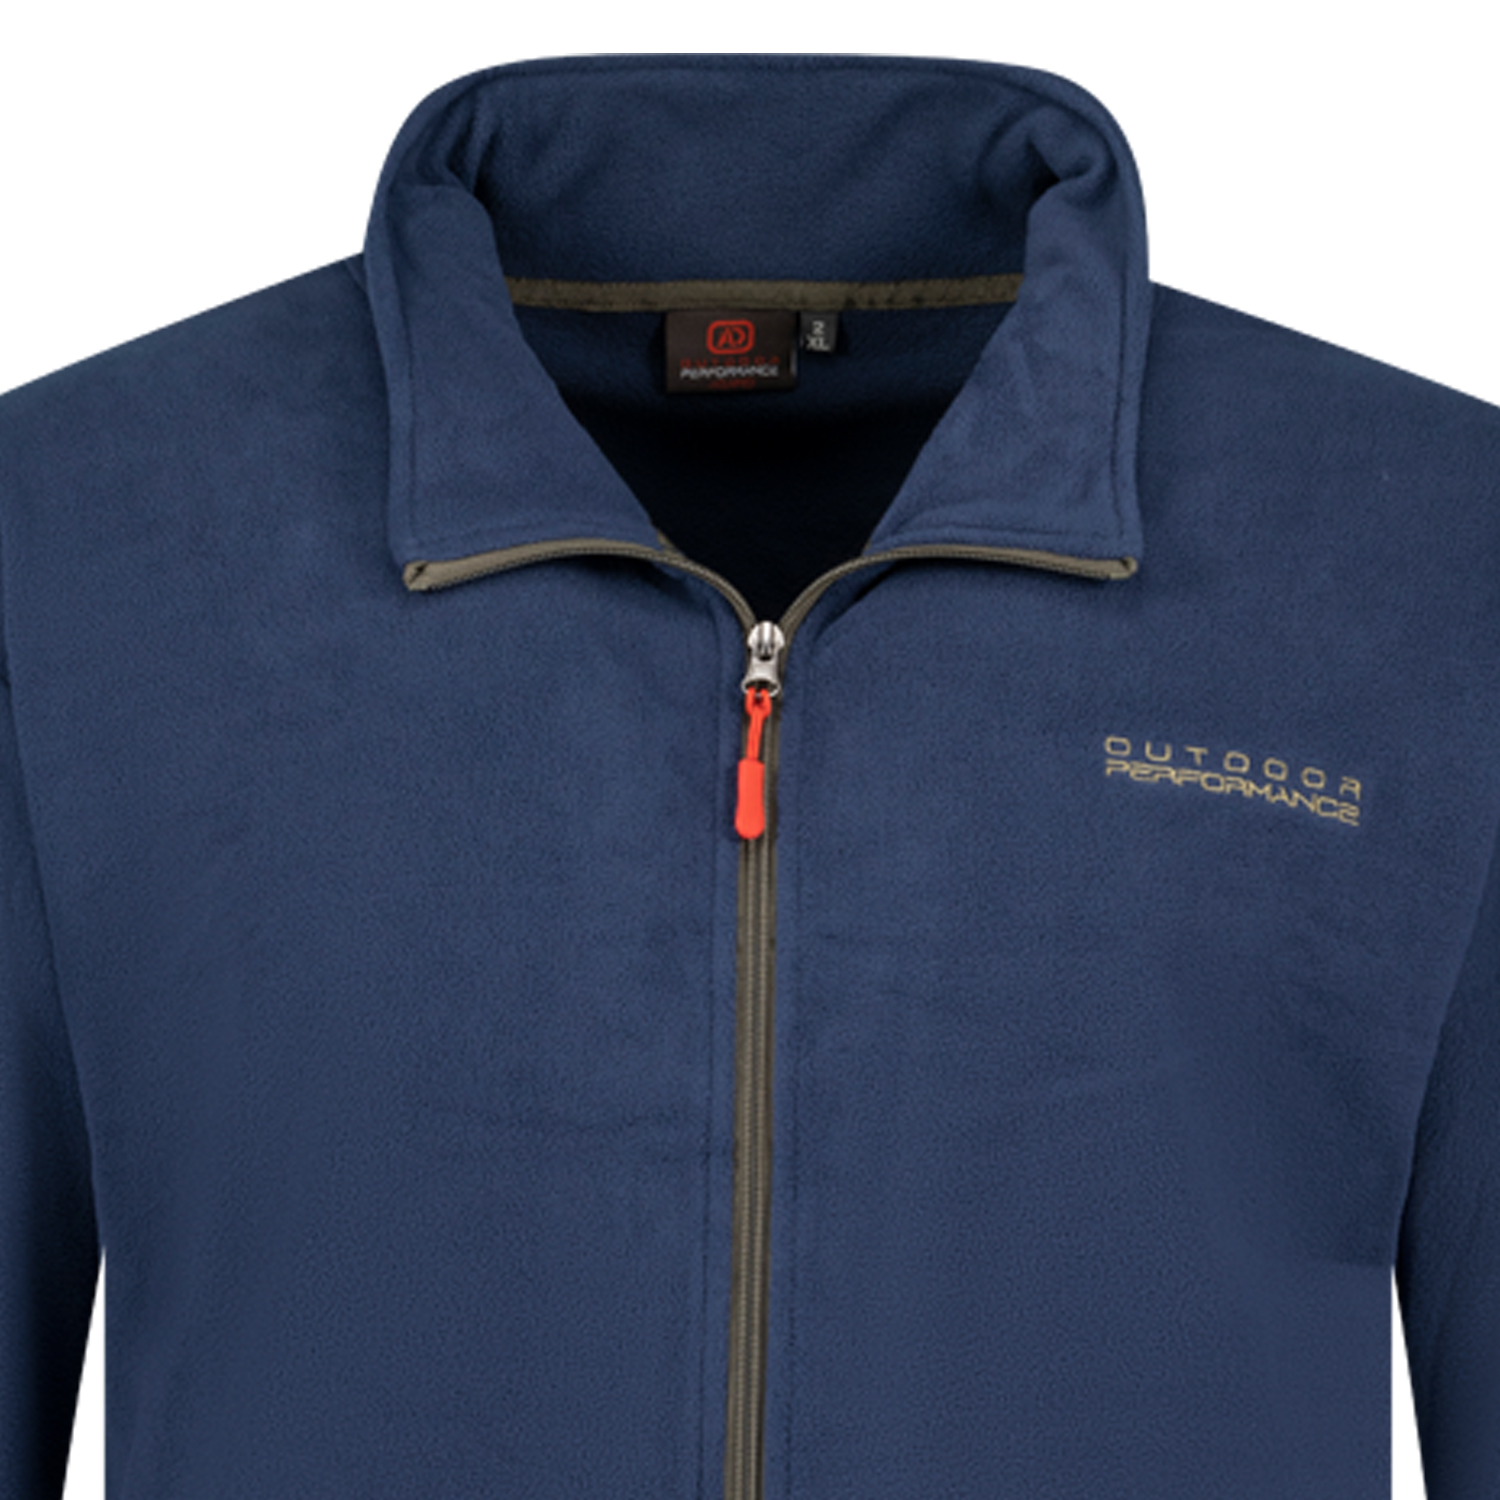 Fleece jacket in navy Series Tampa by Adamo Tall Fit extra long in long sizes up to 5XLT